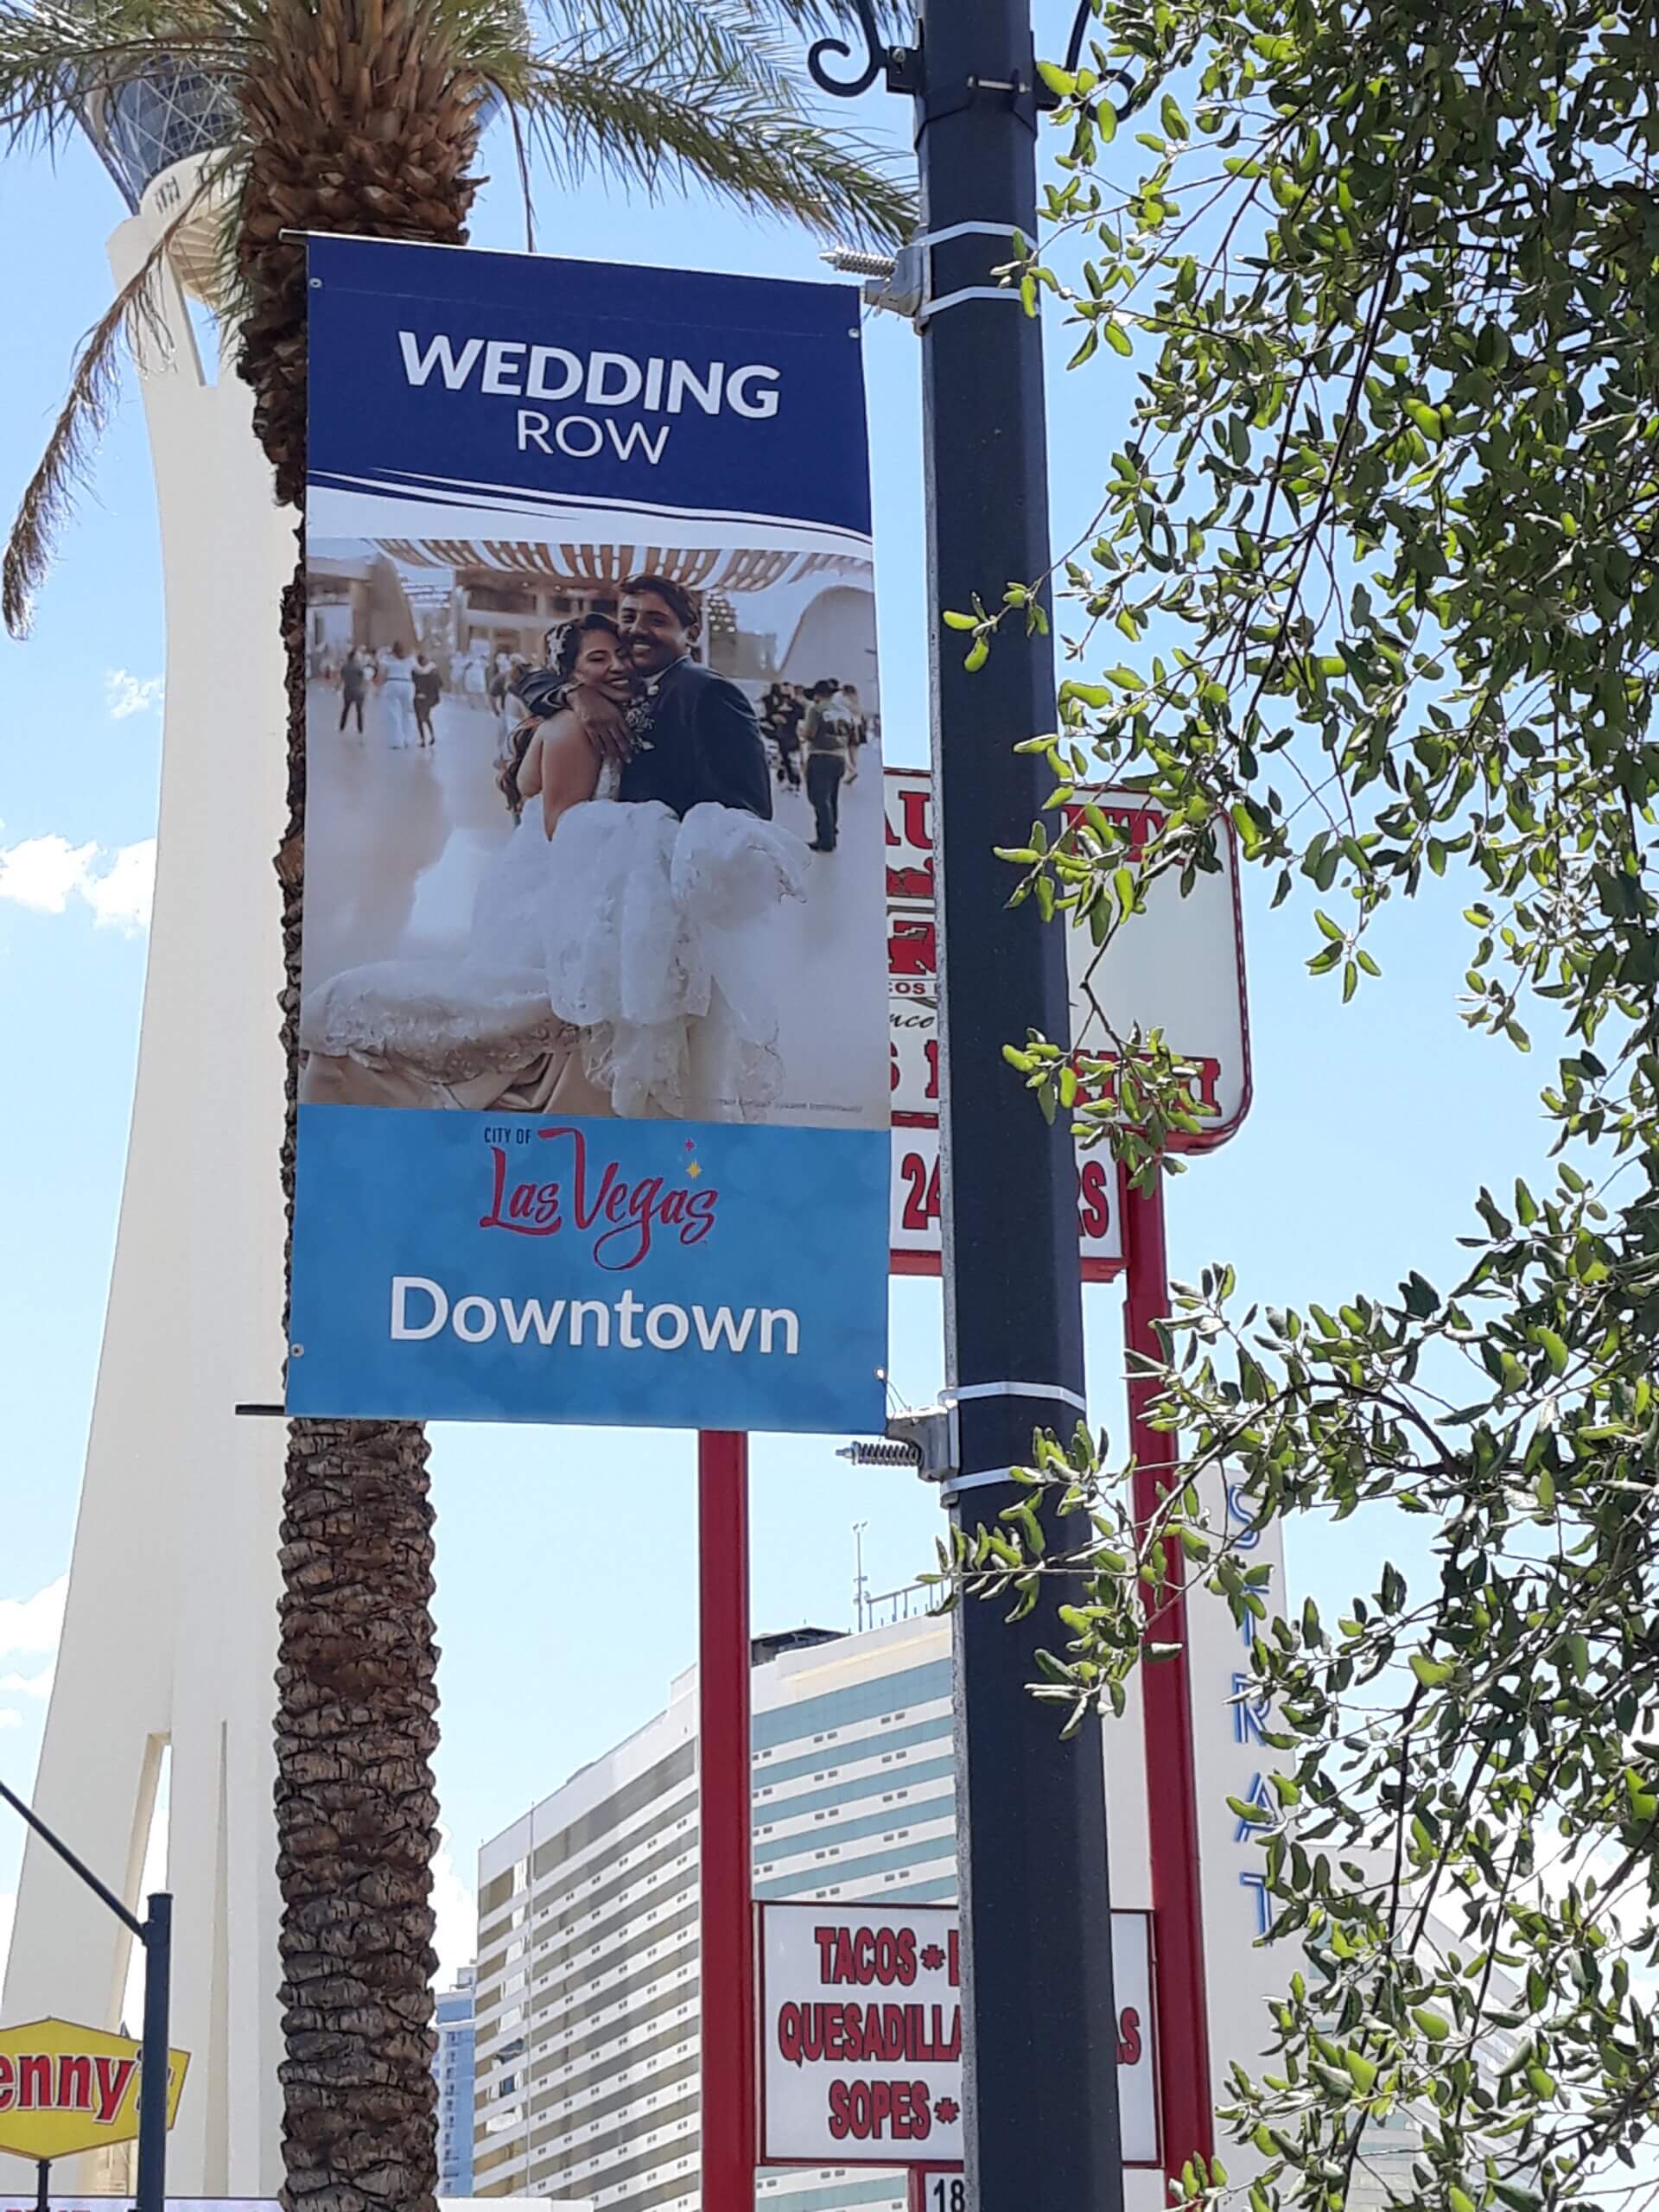 New welcome sign coming to downtown Las Vegas, Downtown